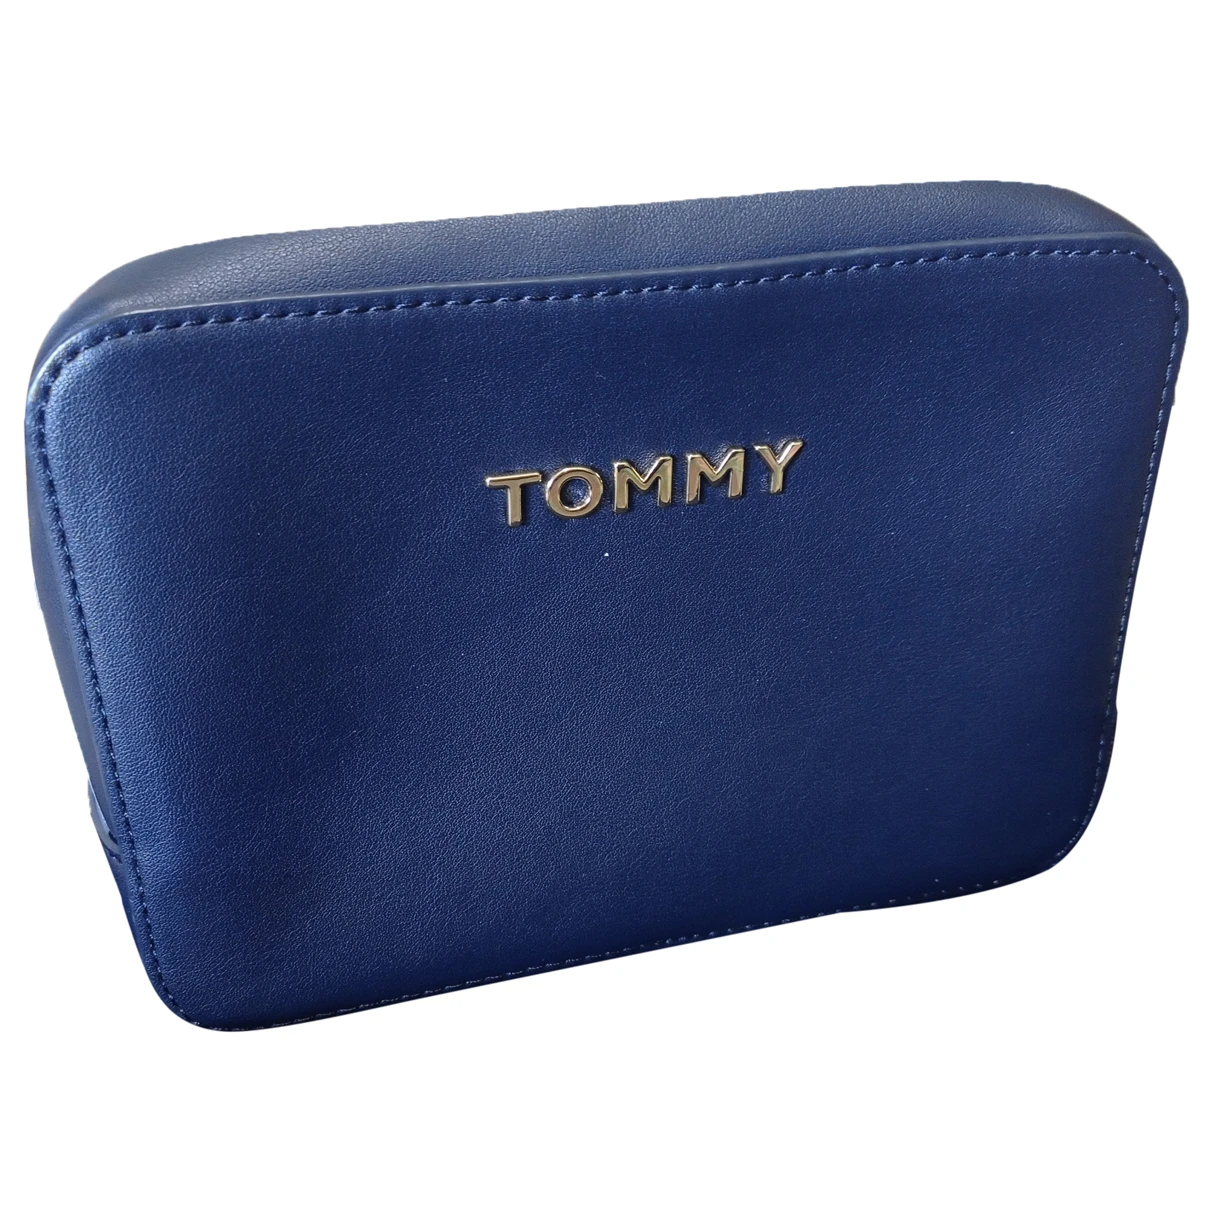 Pre-owned Tommy Hilfiger Clutch Bag In Blue